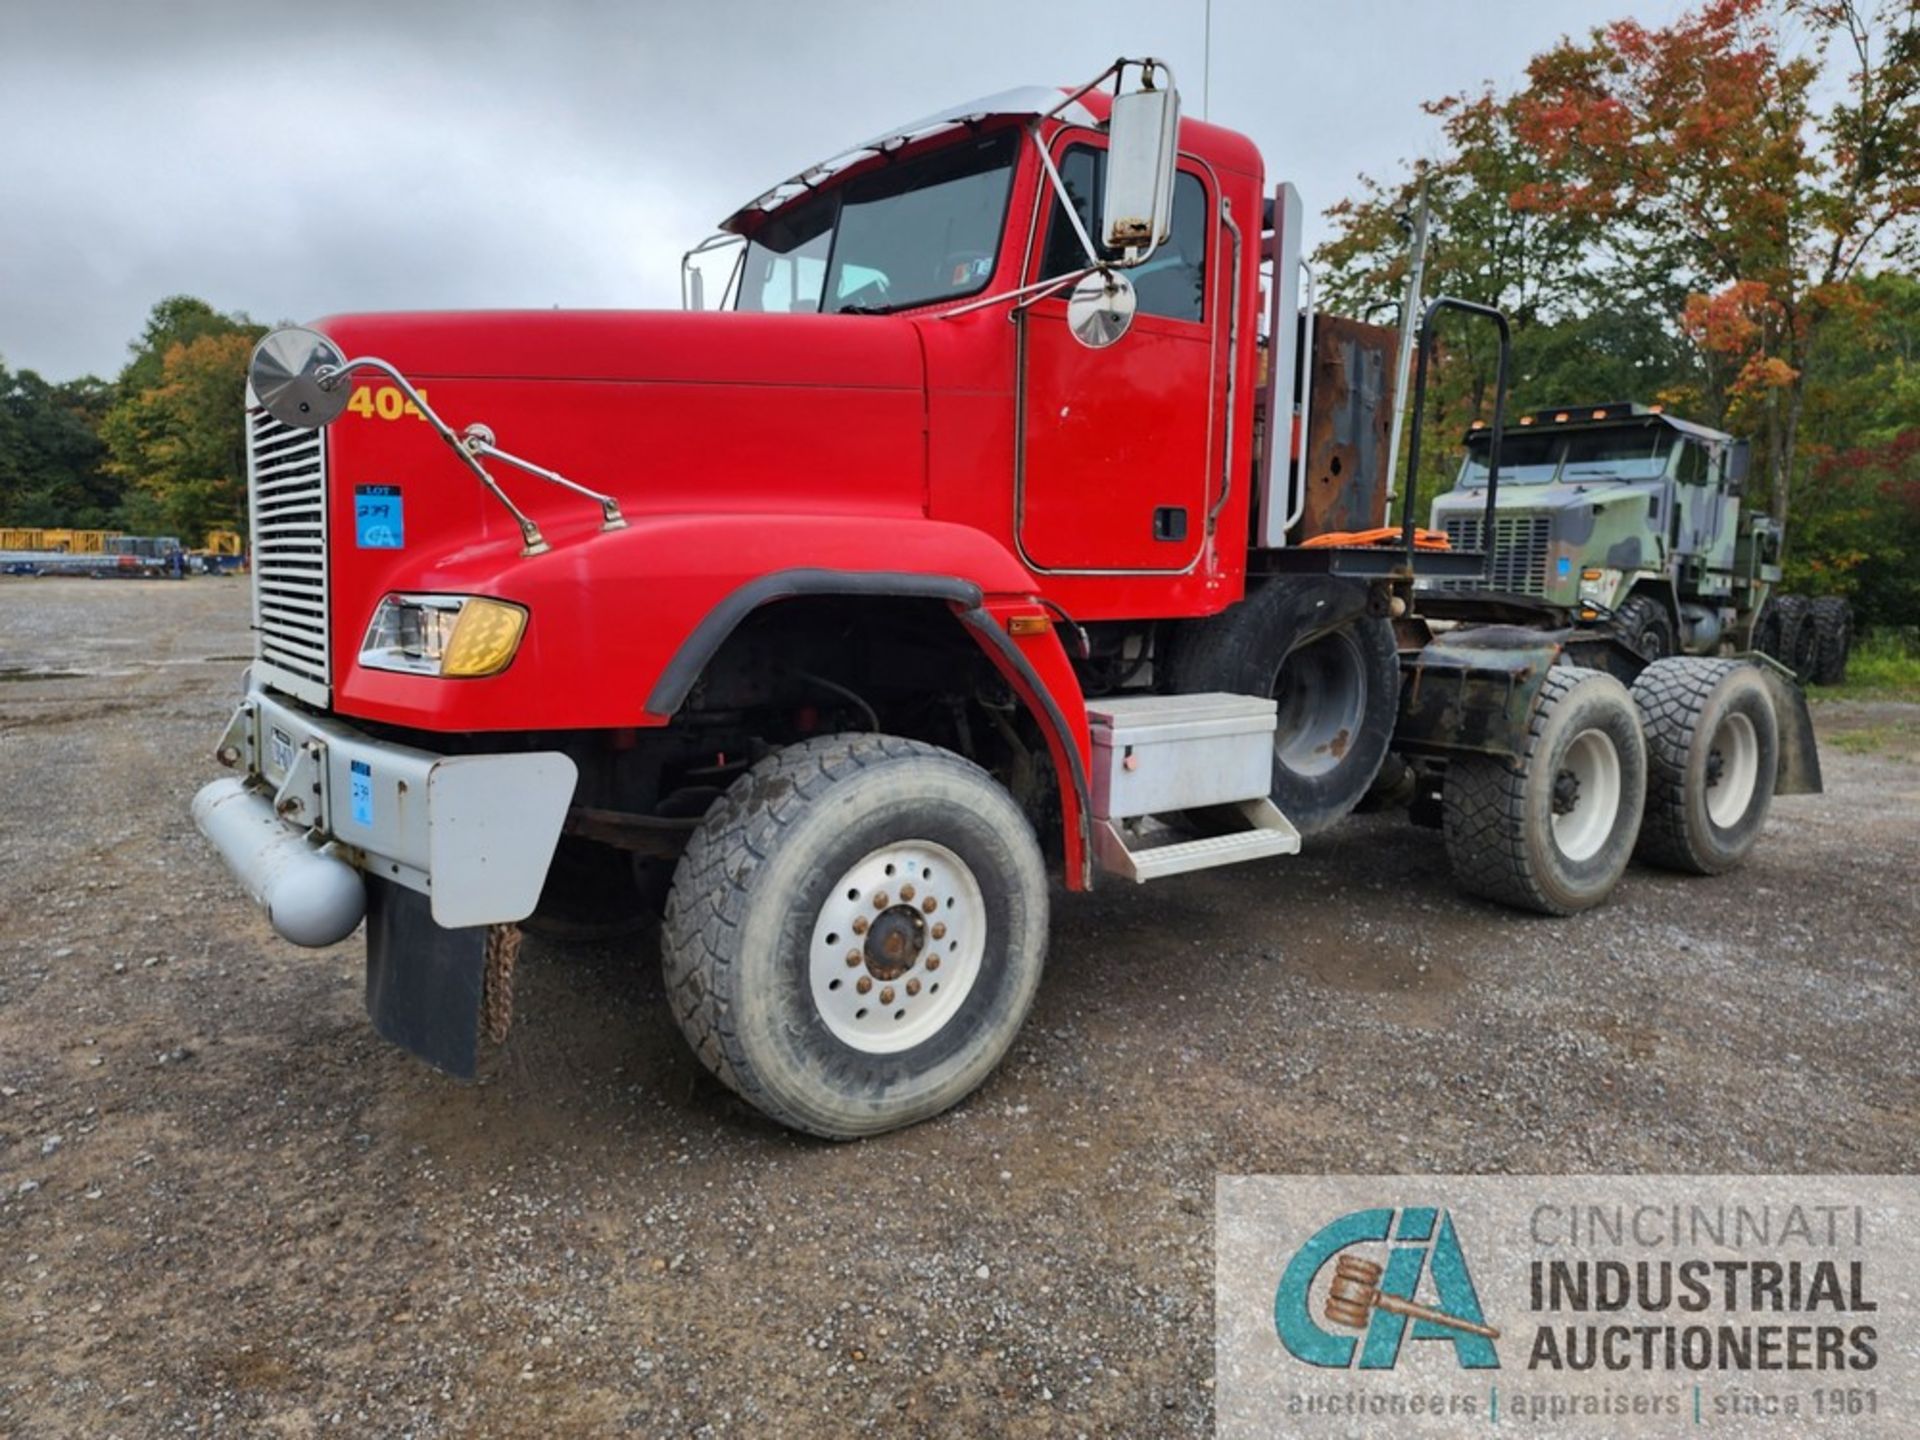 1992 FREIGHTLINER 6X6 MODEL M916-A1 MILITARY TRUCK; VIN 1FUCMZY86NP357797, WITH WINCH SYSTEM,